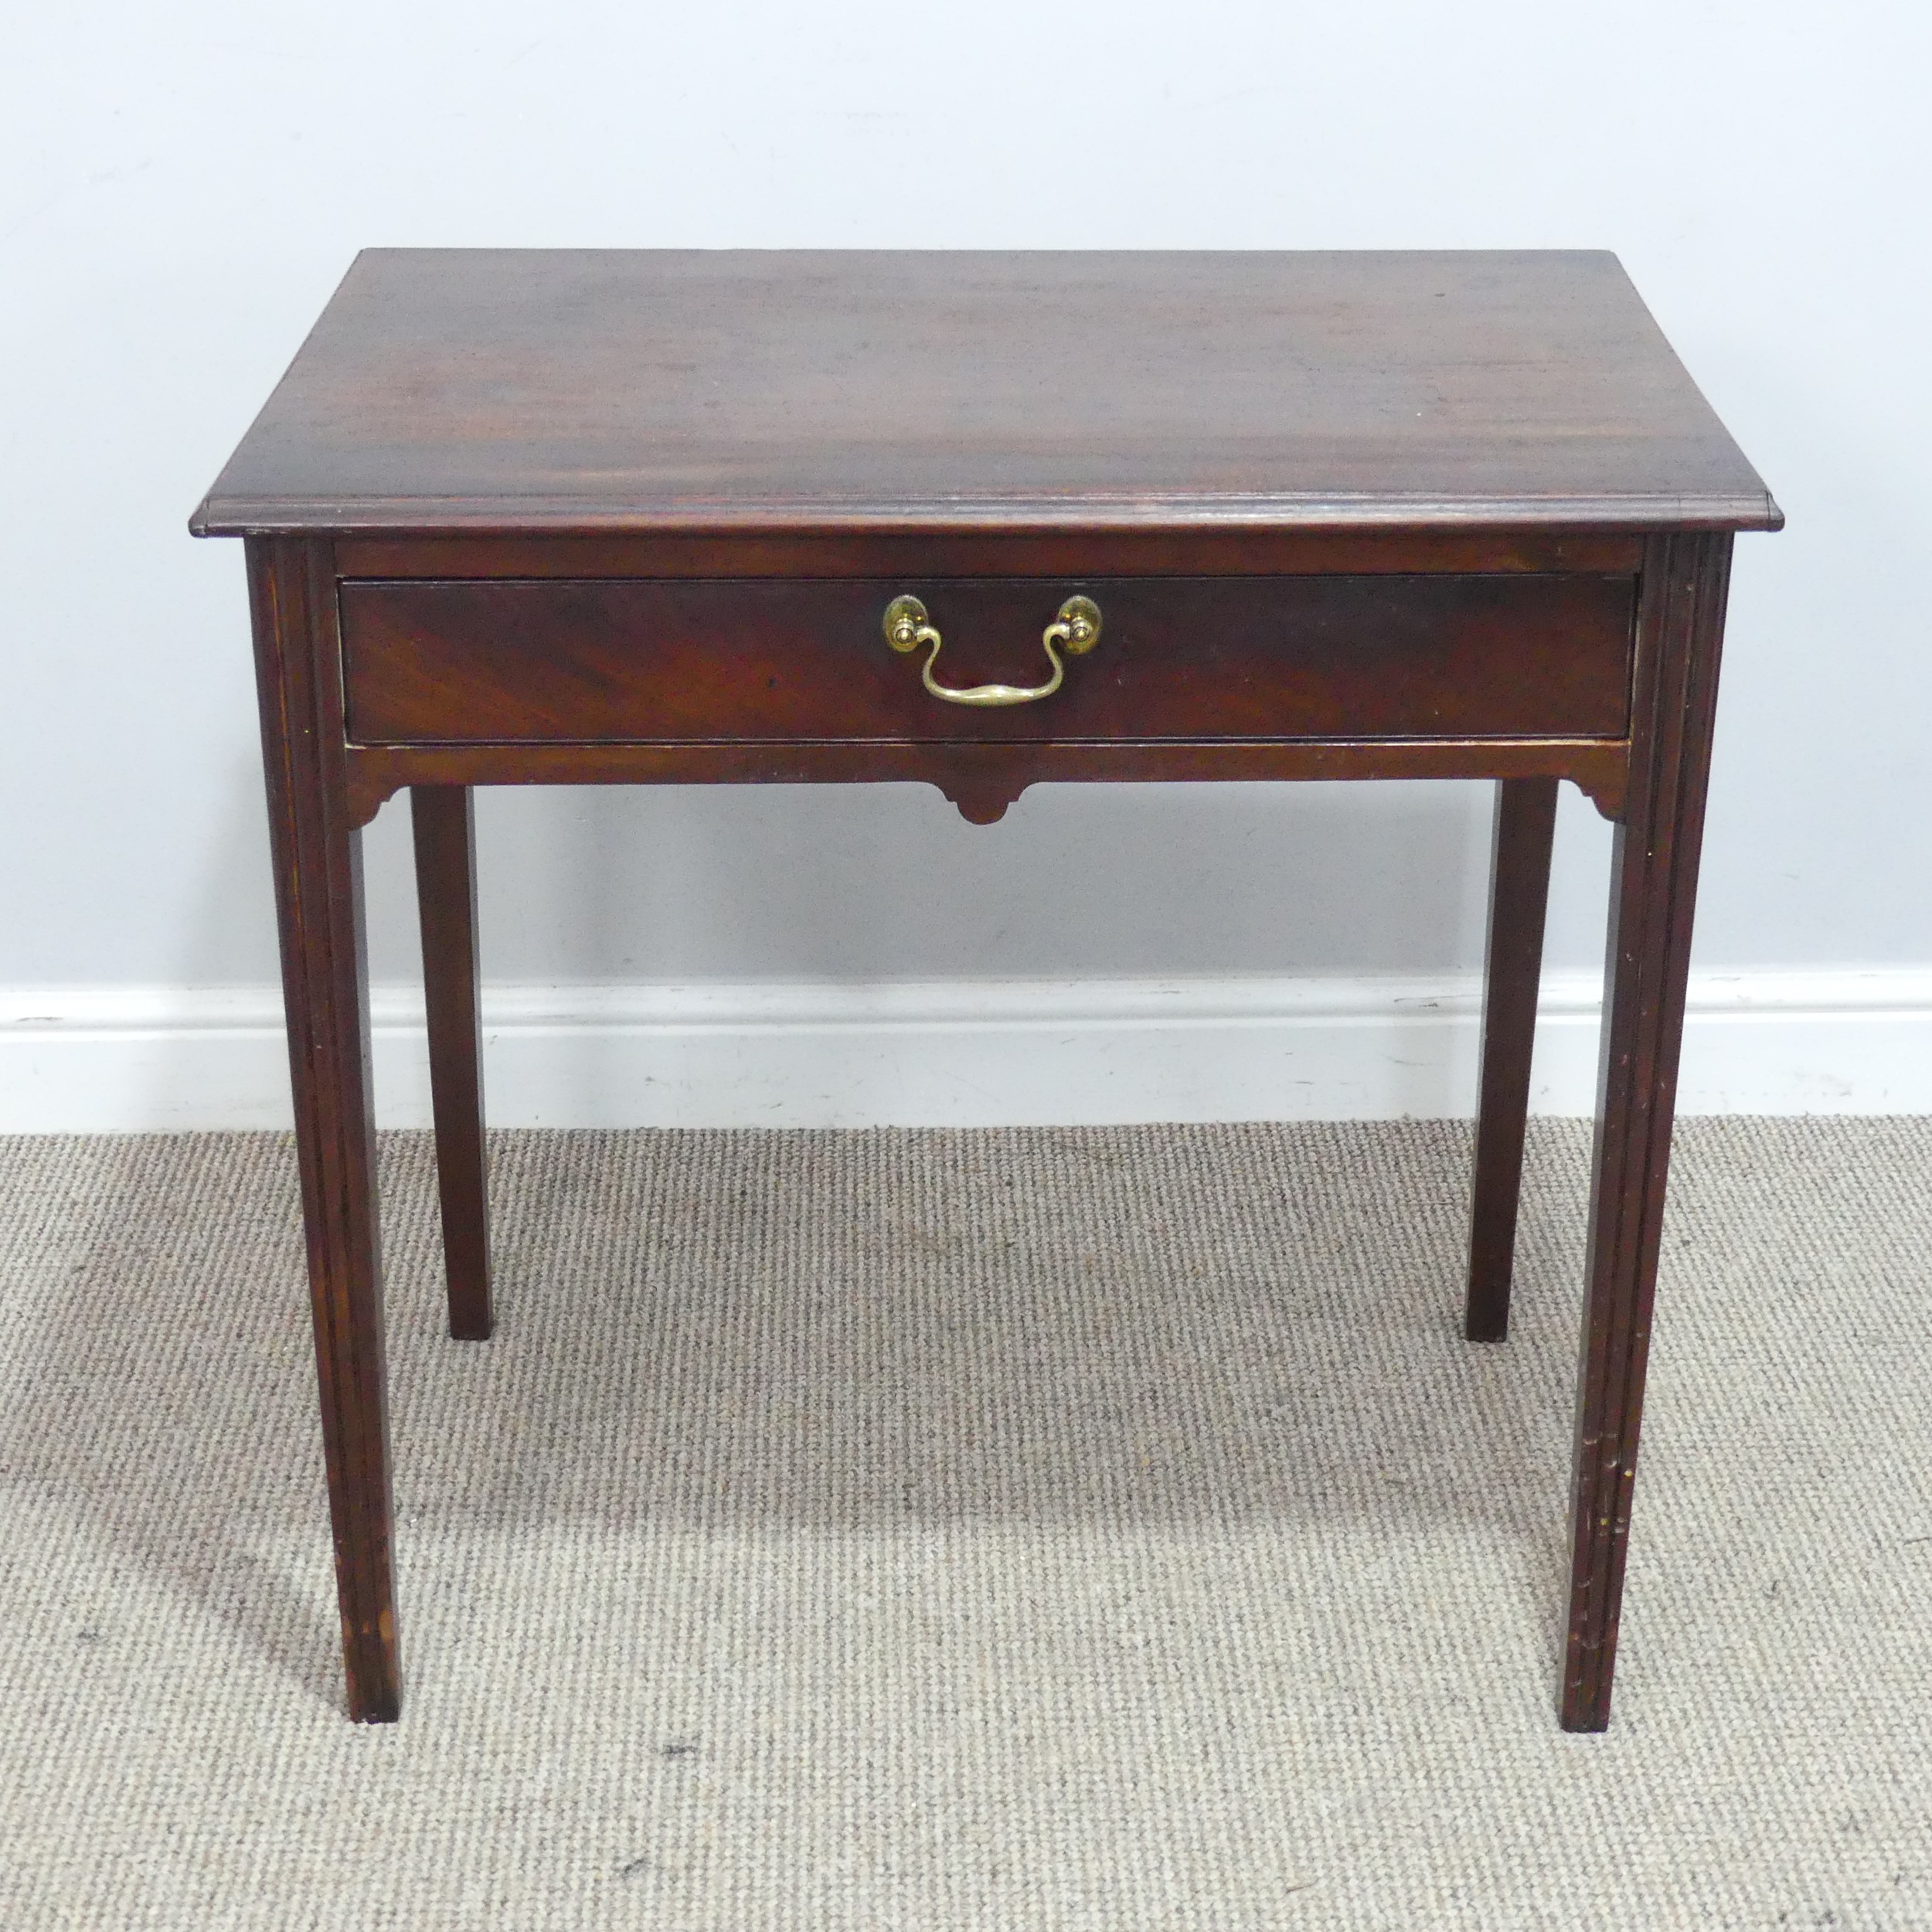 A Georgian mahogany side Table, moulded top over one drawer, raised on reeded legs, W 75.5 cm x H